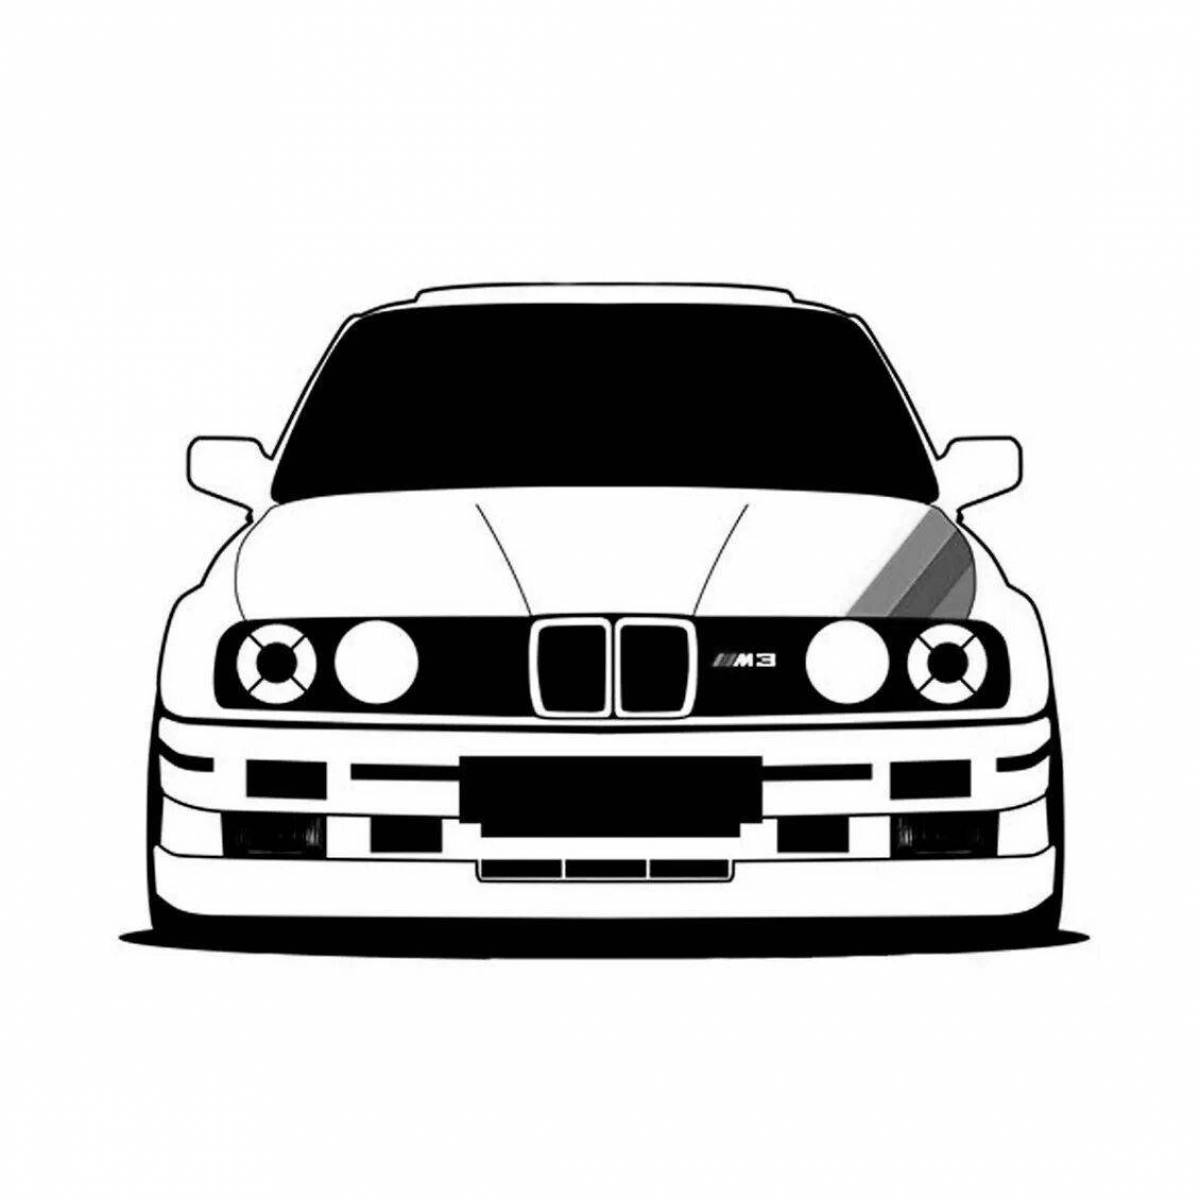 Fantastic coloring book with bmw logo